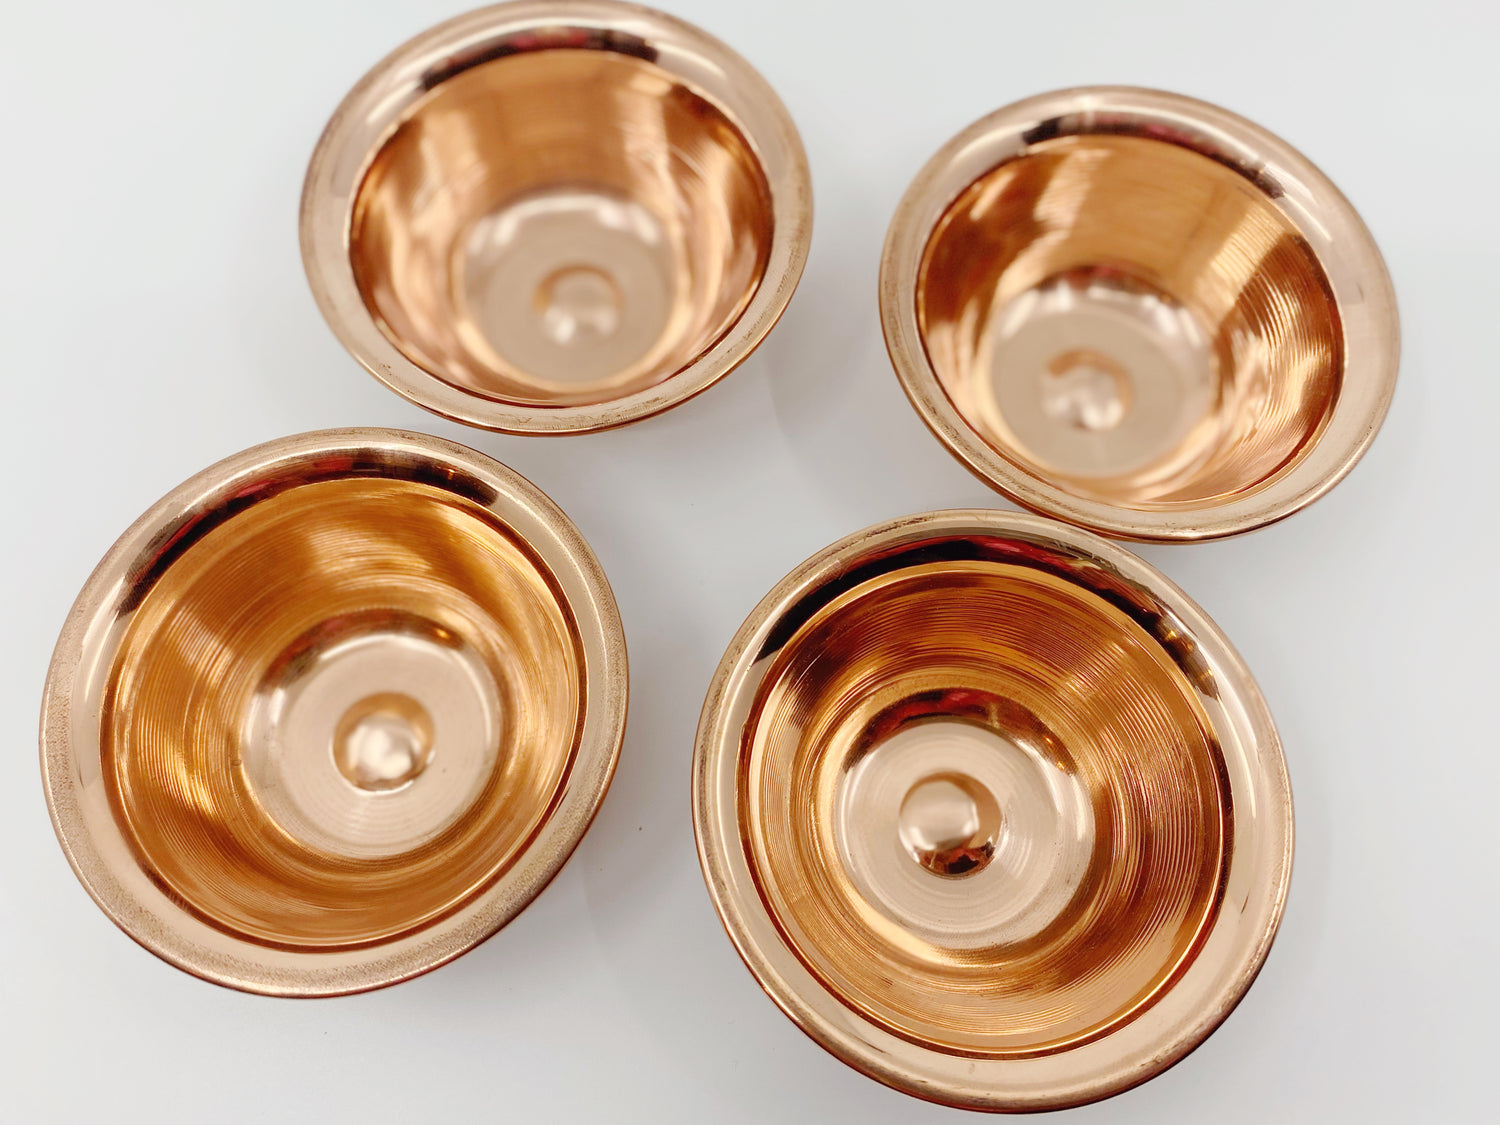 Copper Offering Bowl - Moon Room Shop and Wellness